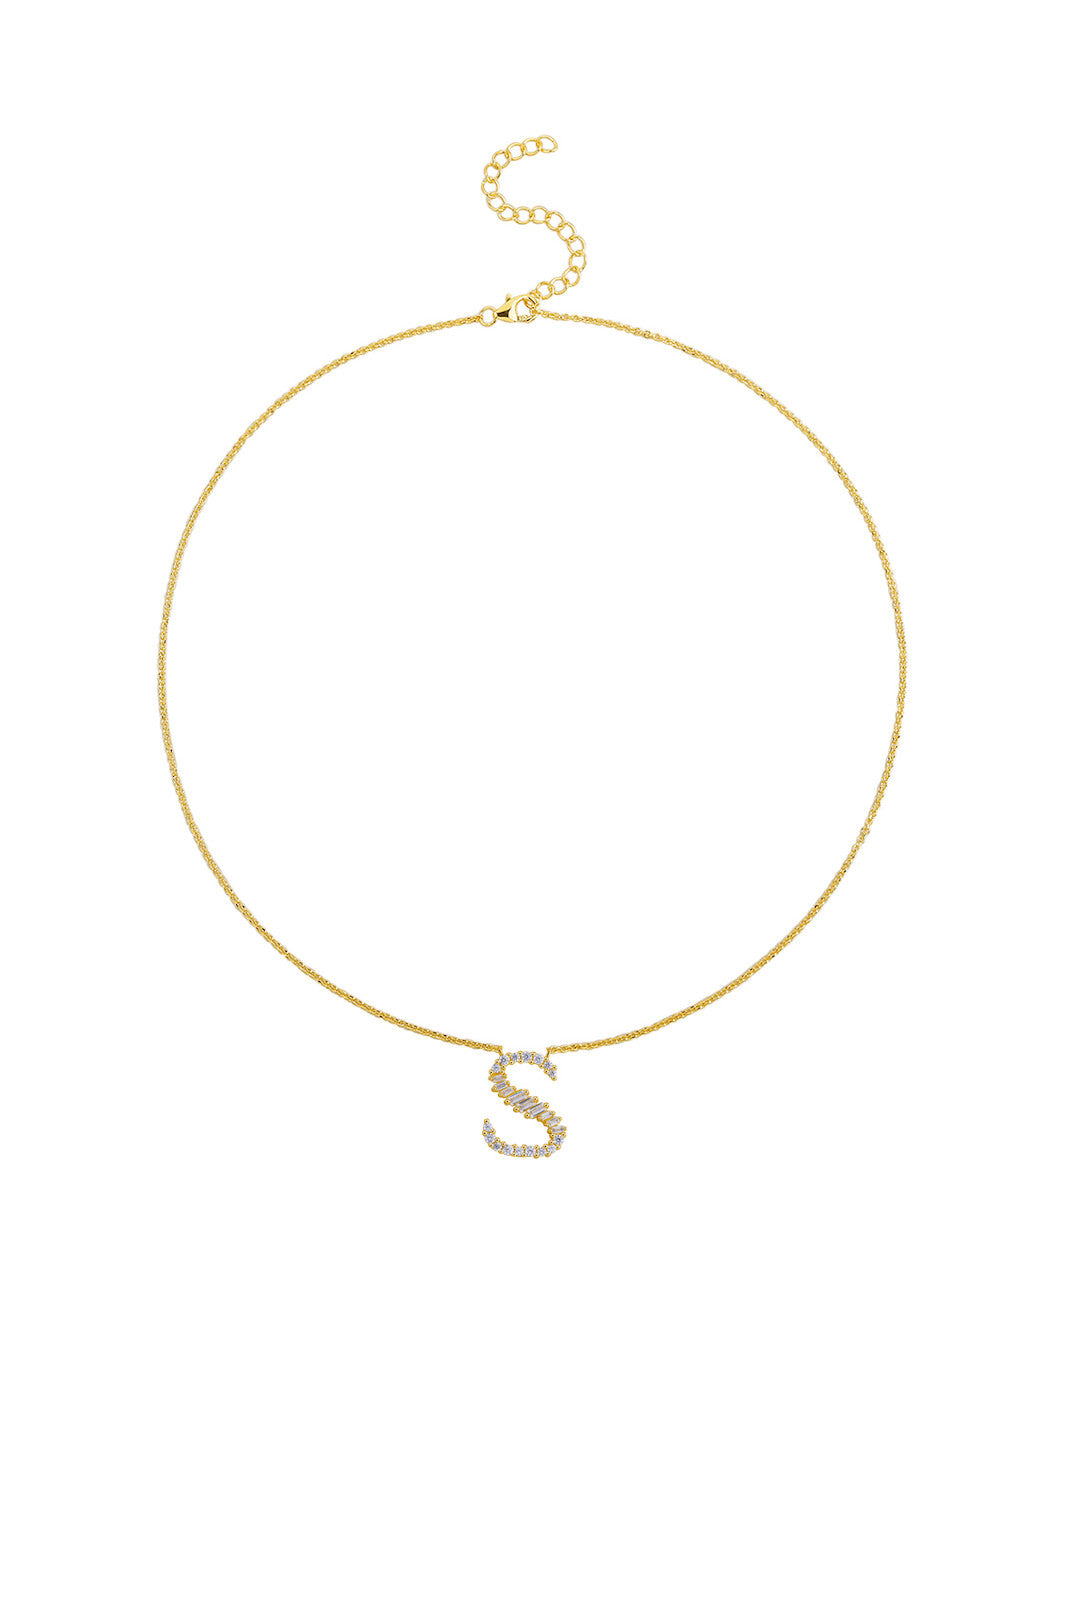 Gold Plated Sterling Silver Initial Necklace - Letter S Detail